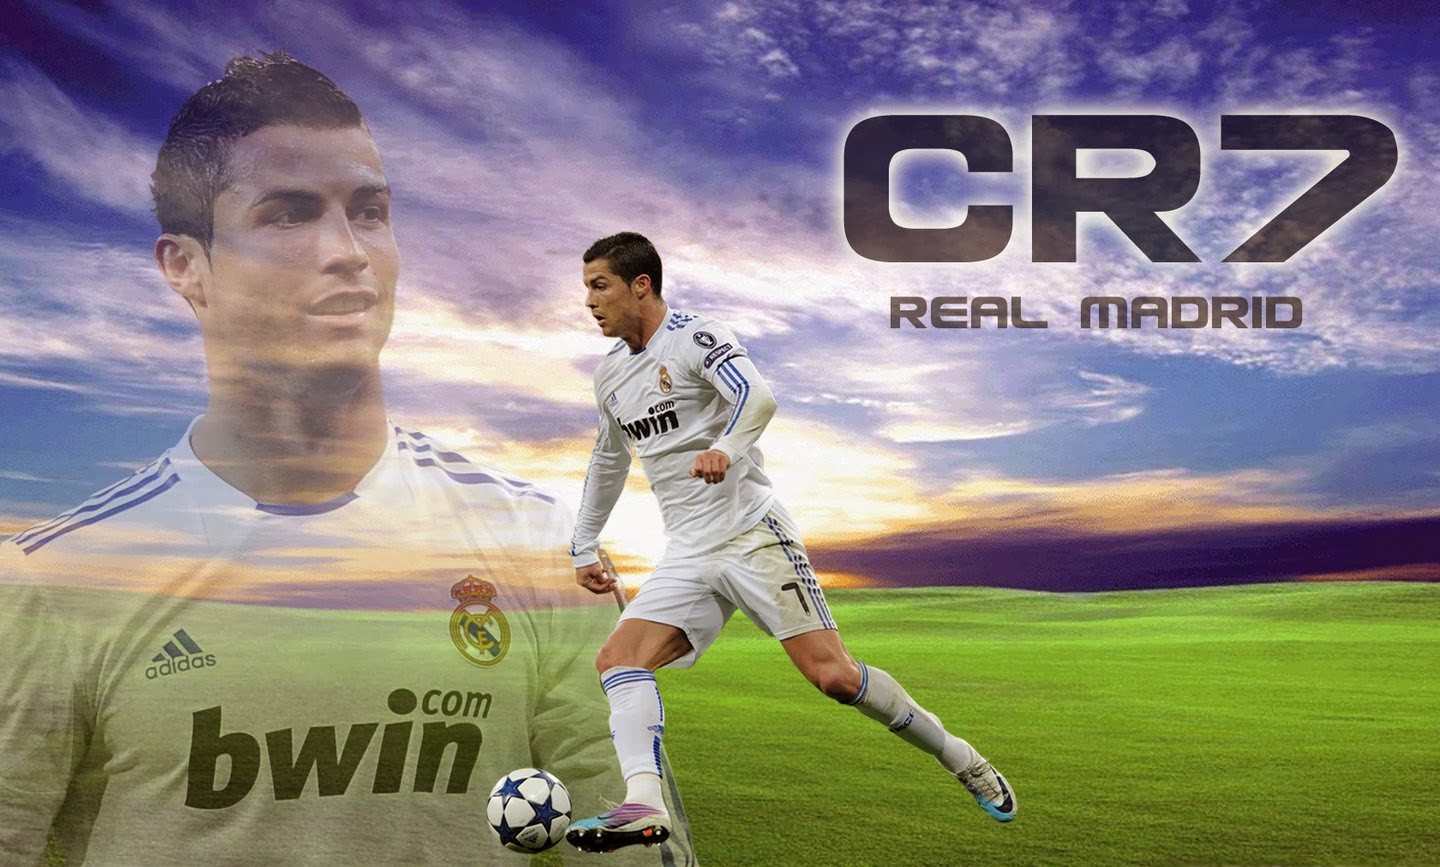 real madrid jersey wallpaper,player,football player,ball game,soccer player,sport venue